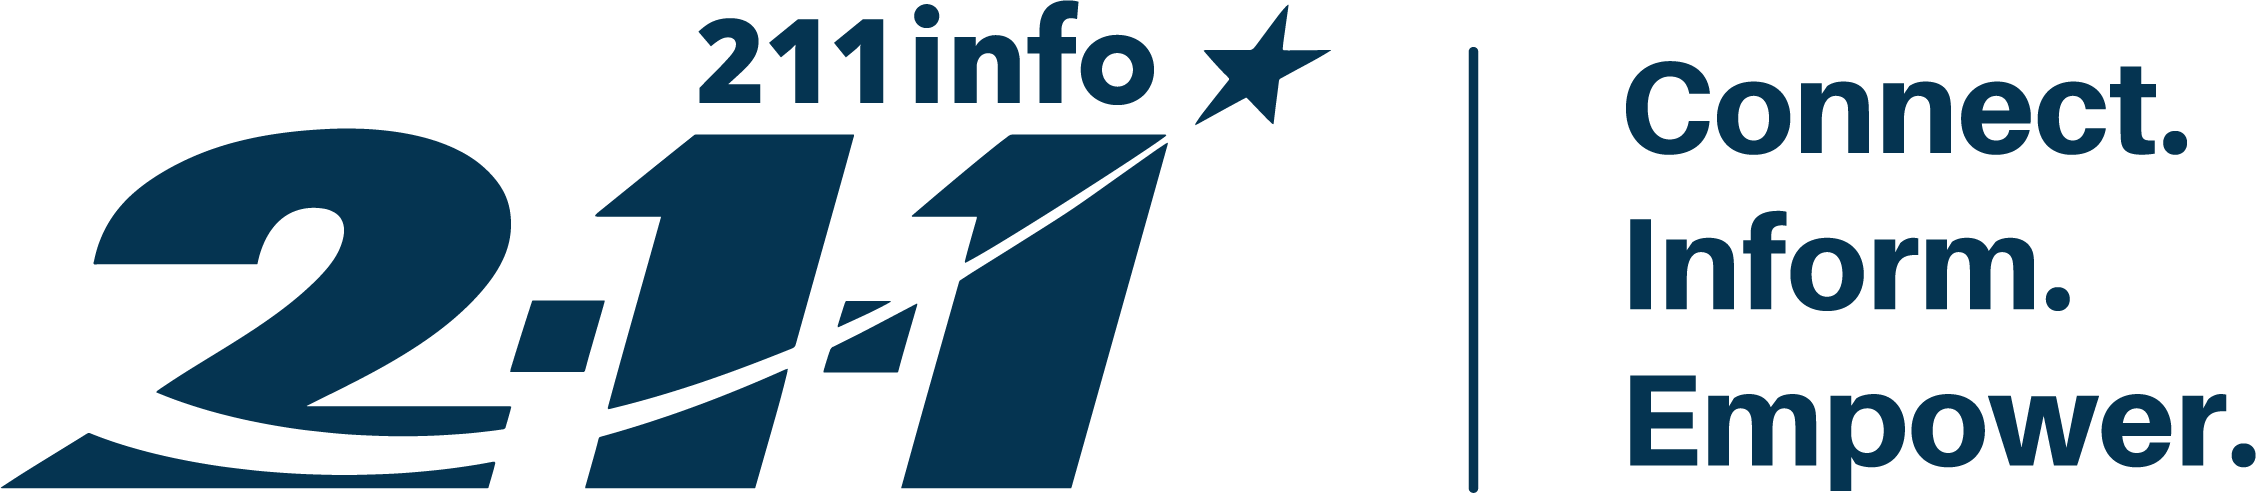 Simple 2 1 1 logo on the left with the words Connect, Inform and Empower on the right.